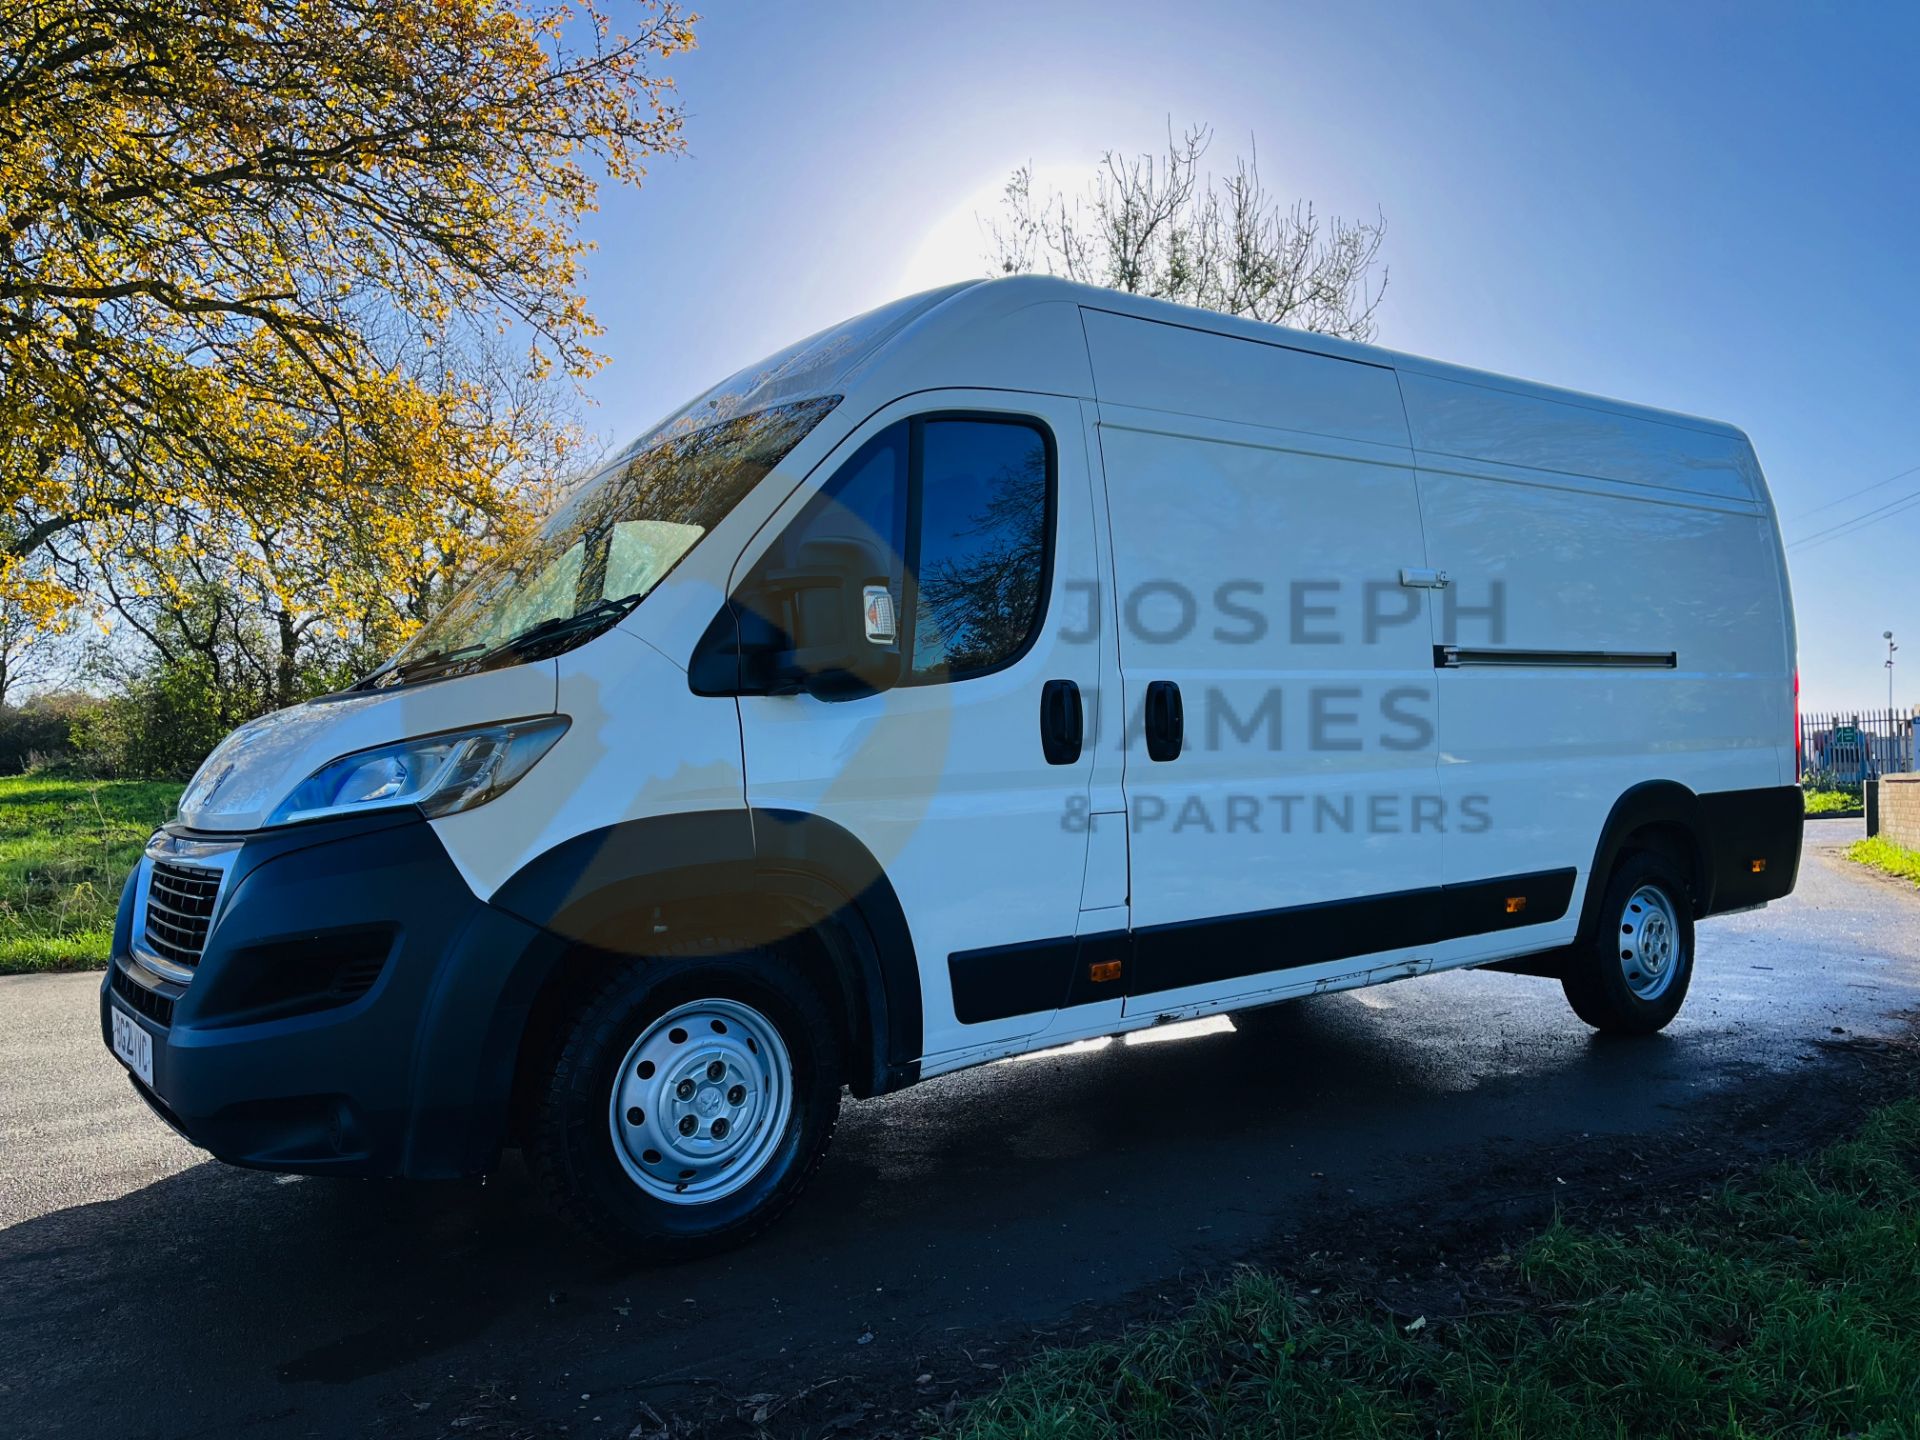 (ON SALE) PEUGEOT BOXER 2.2 BLUE-HDI "PROFESSIONAL" LWB MAXI 435 (2021 MODEL) SAT NAV (AIR CON) - Image 6 of 22